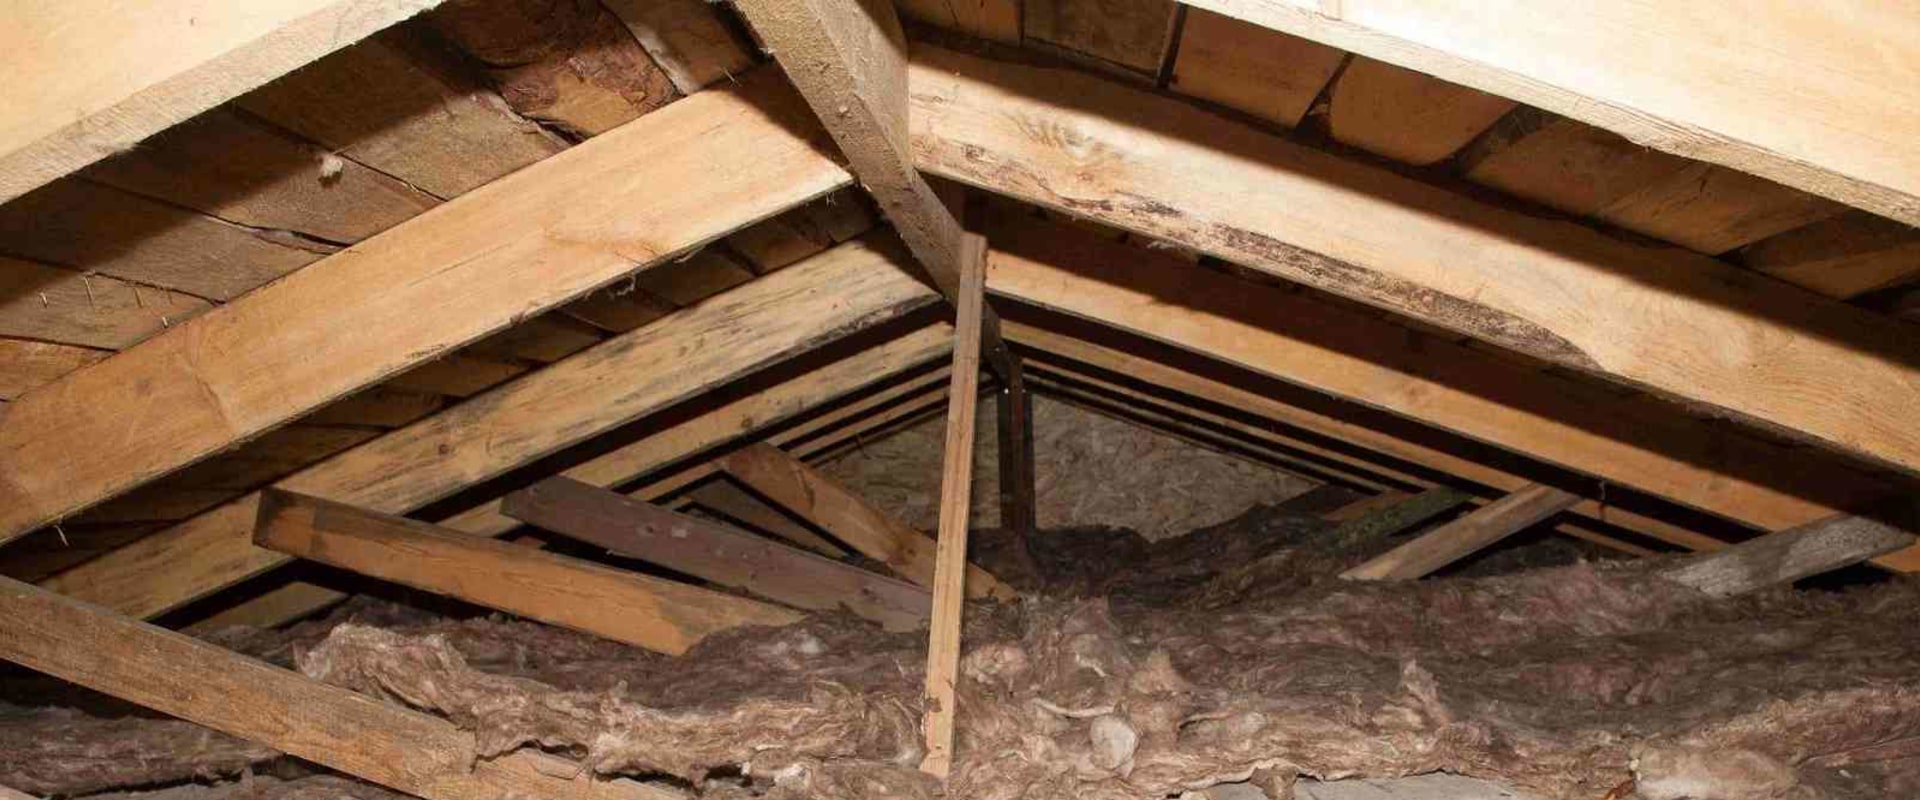 Installing Attic Insulation in a Humid Climate: What You Need to Know